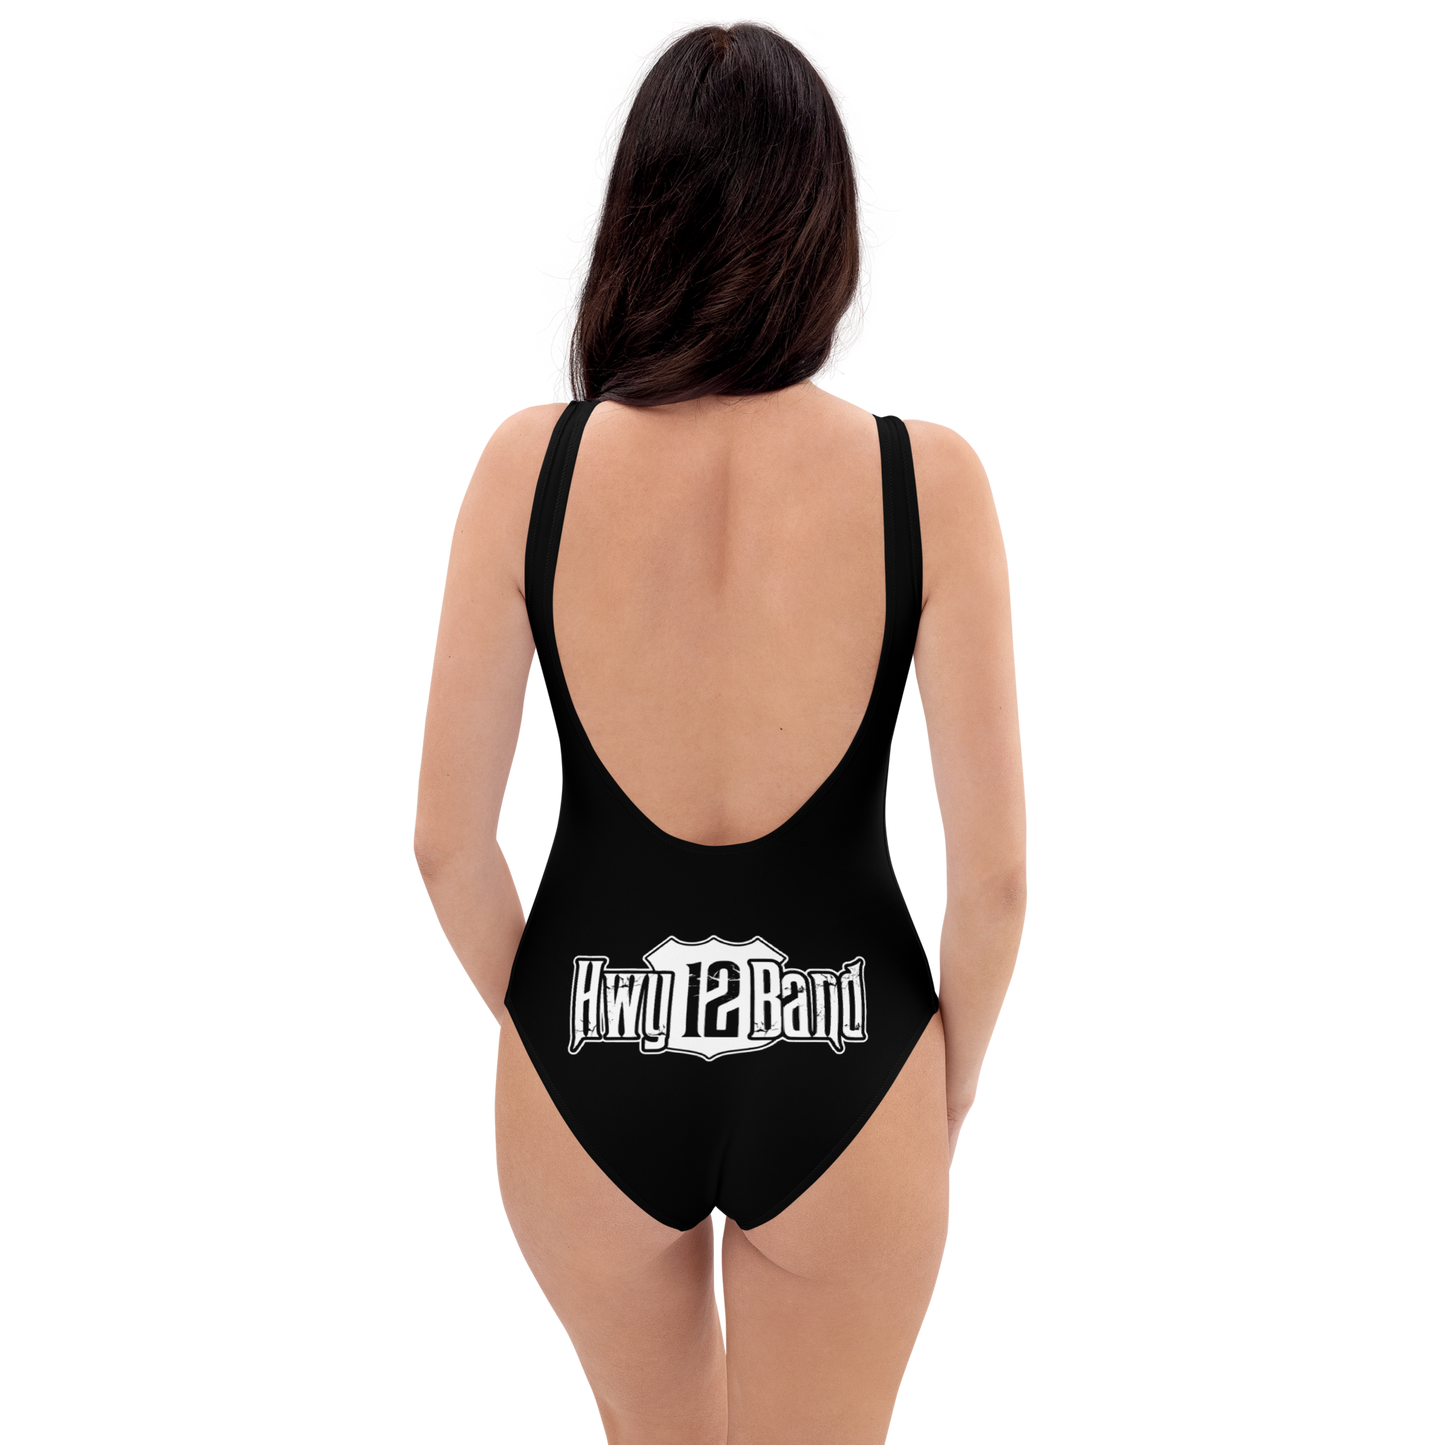 Hwy 12 Band One-Piece Swimsuit